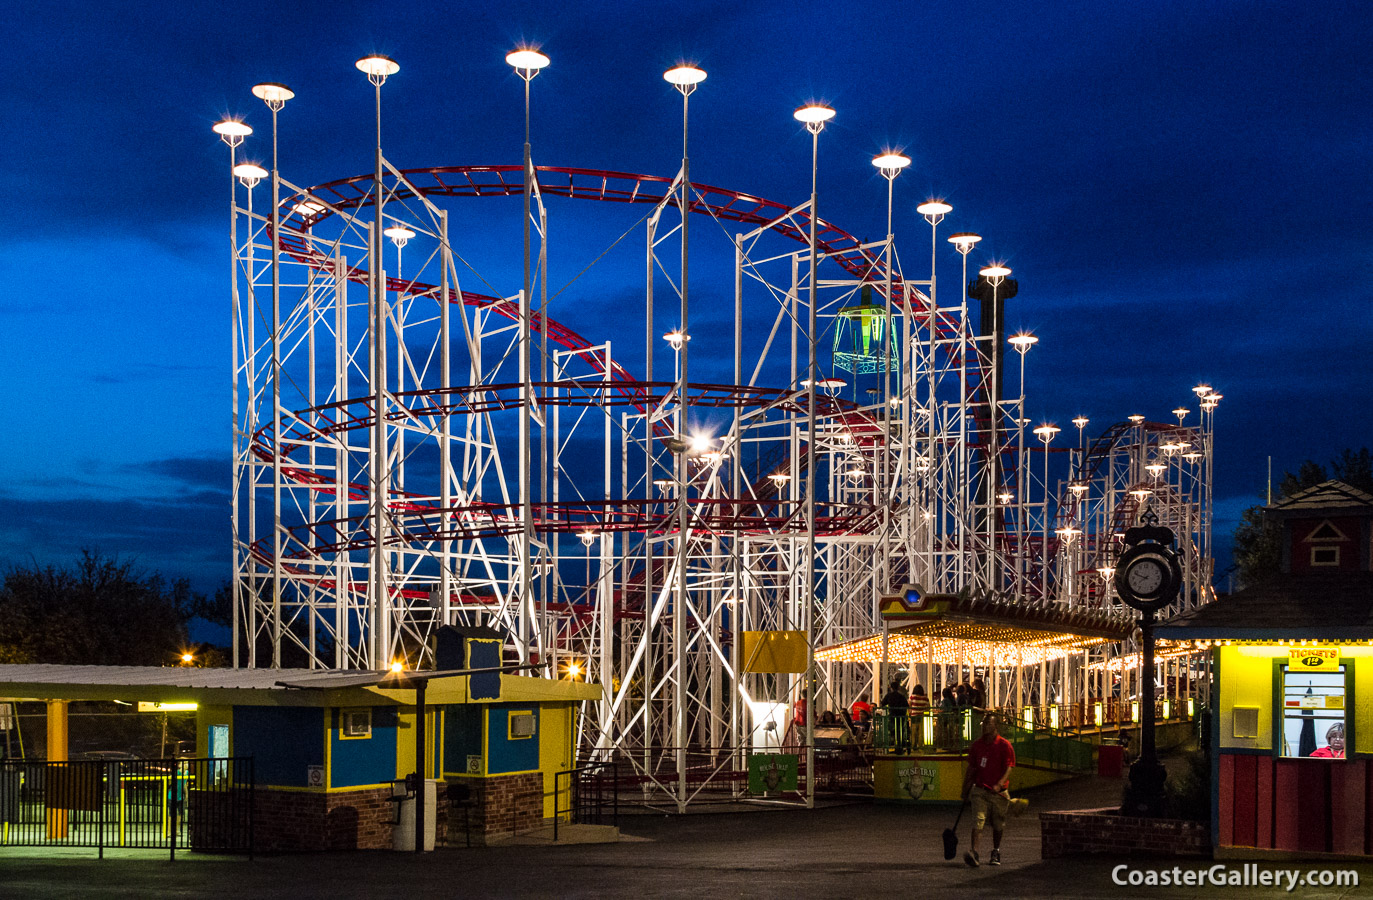 An amusement park and roller coaster lit up at night.